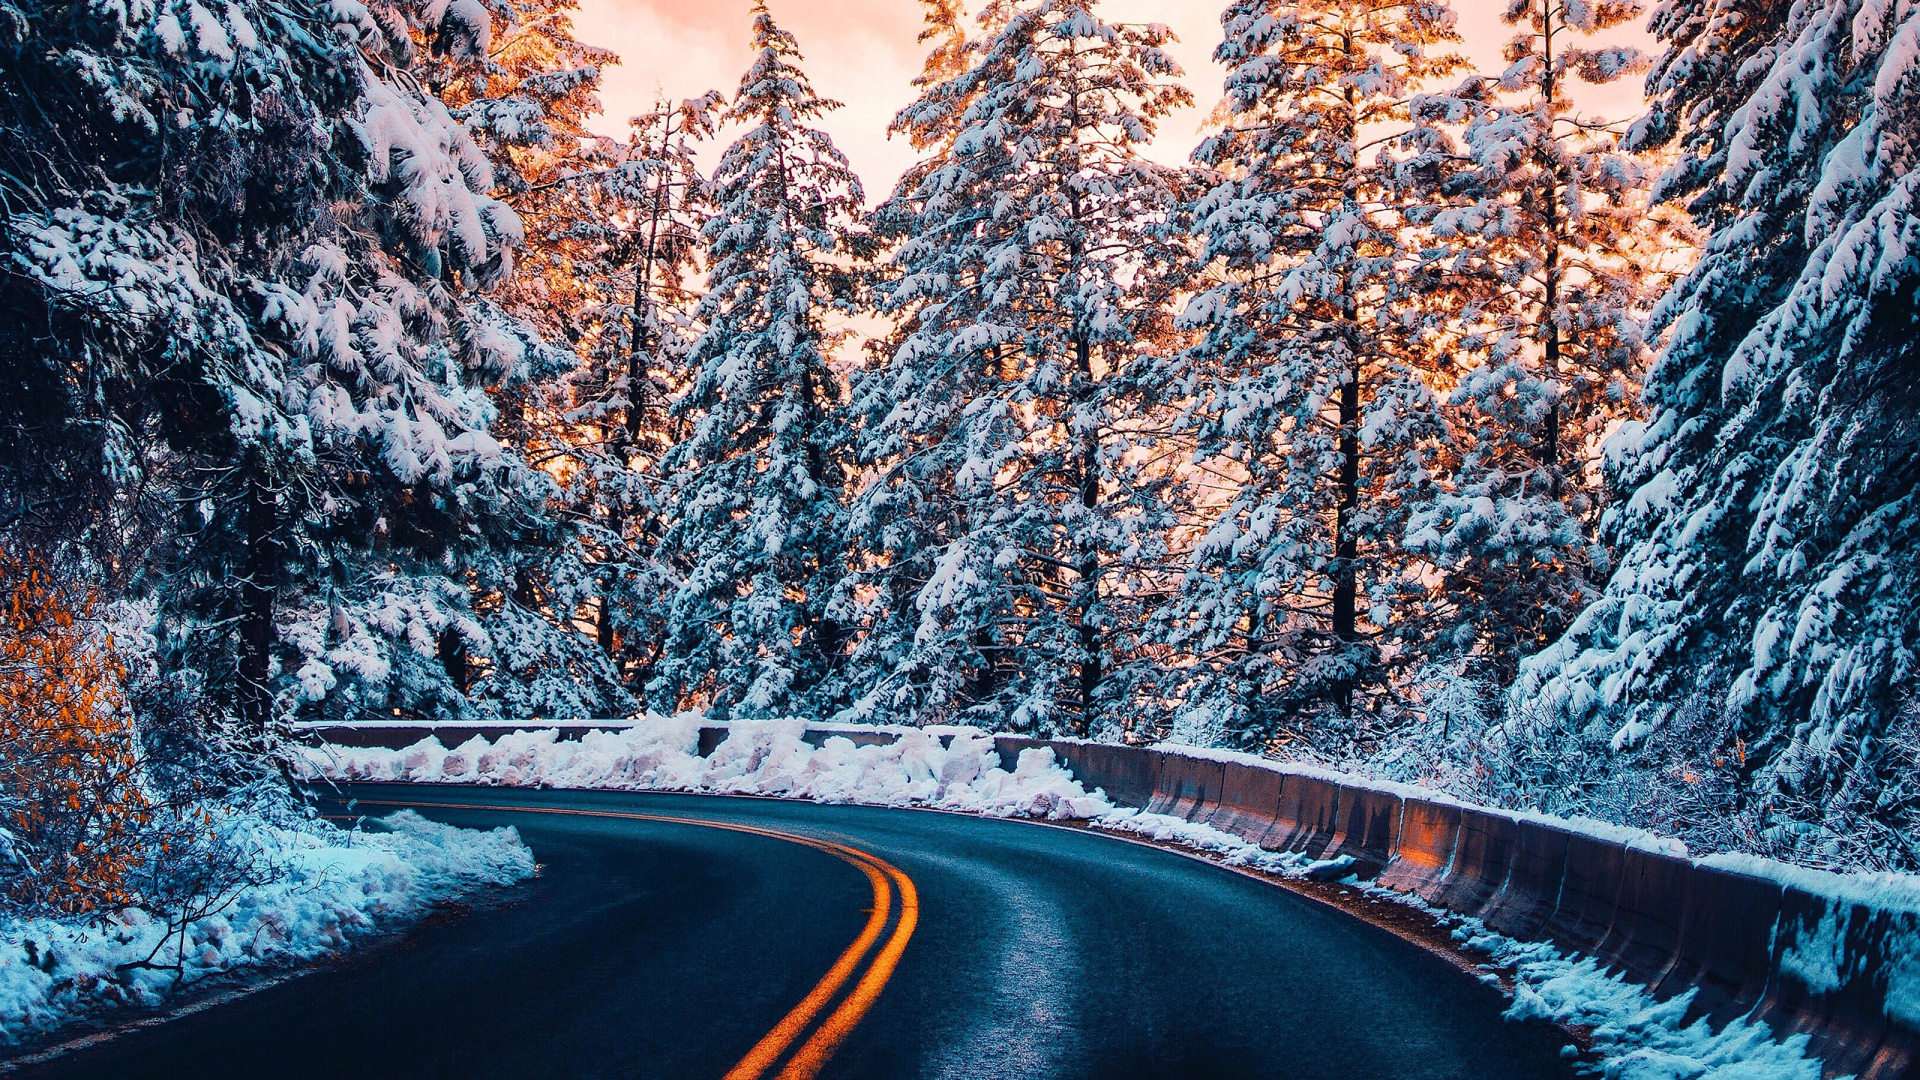 Download wallpaper 1920x1080 nature, winter, forest, road, full hd, hdtv, fhd, 1080p wallpaper, 1920x1080 HD background, 23259